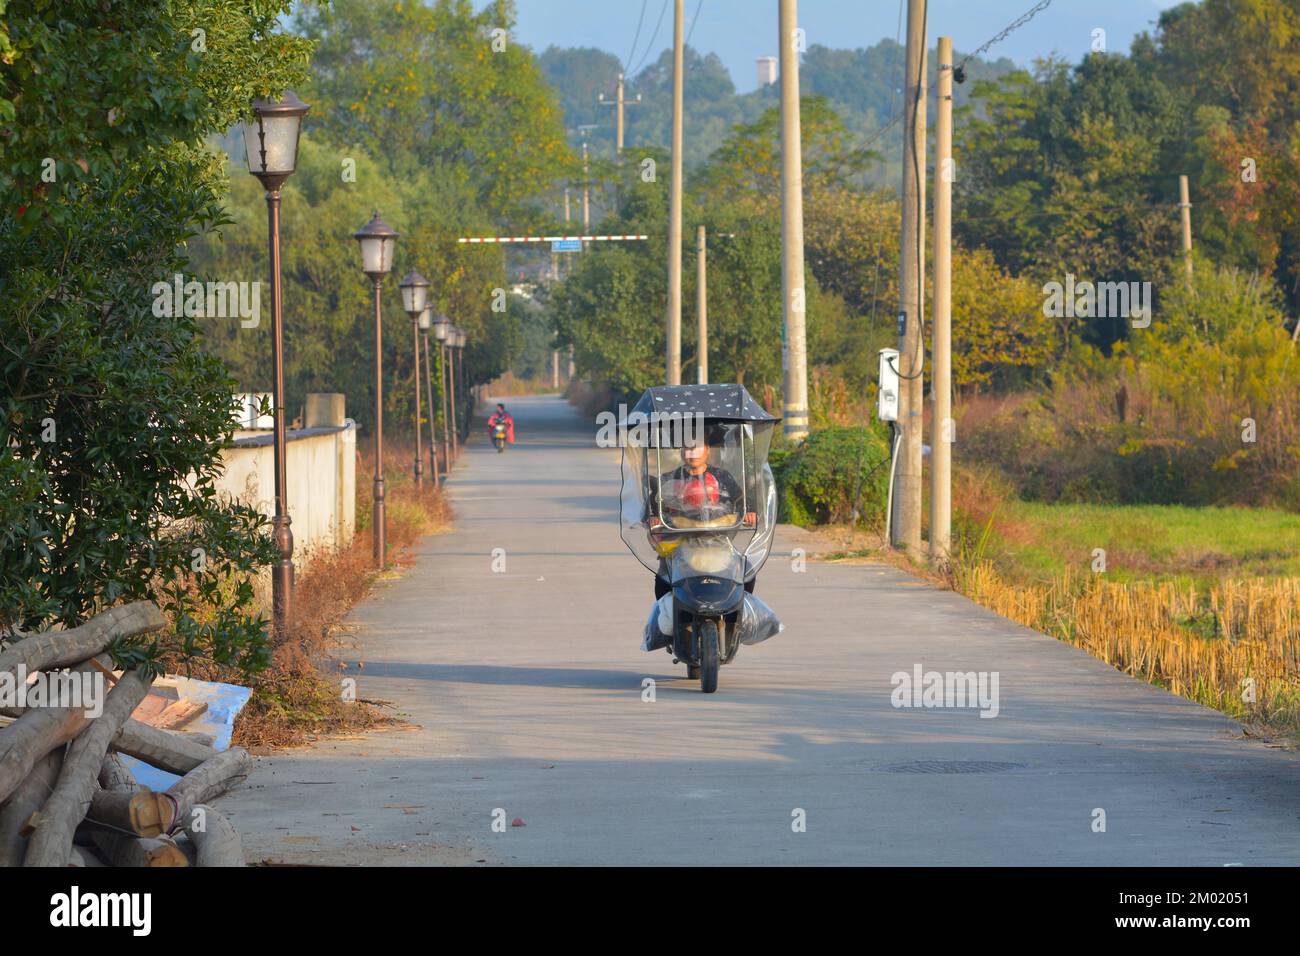 Street life in a small village in rural China. Moped drivers going through the quiet countryside. Stock Photo